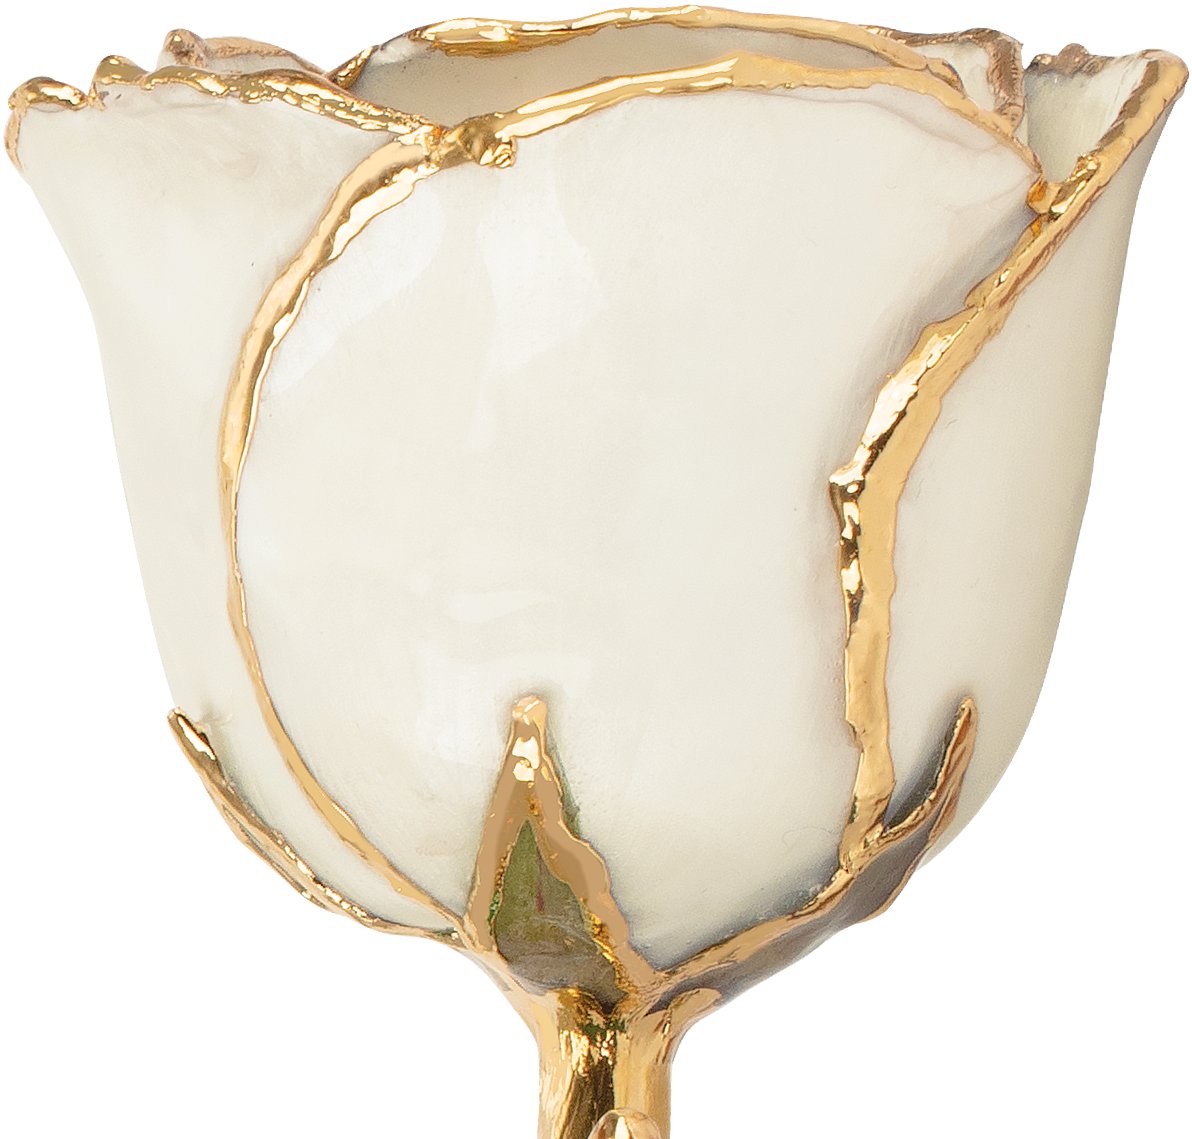 Lacquered June Pearl Colored Rose with Gold Trim - BN & CO JEWELRY